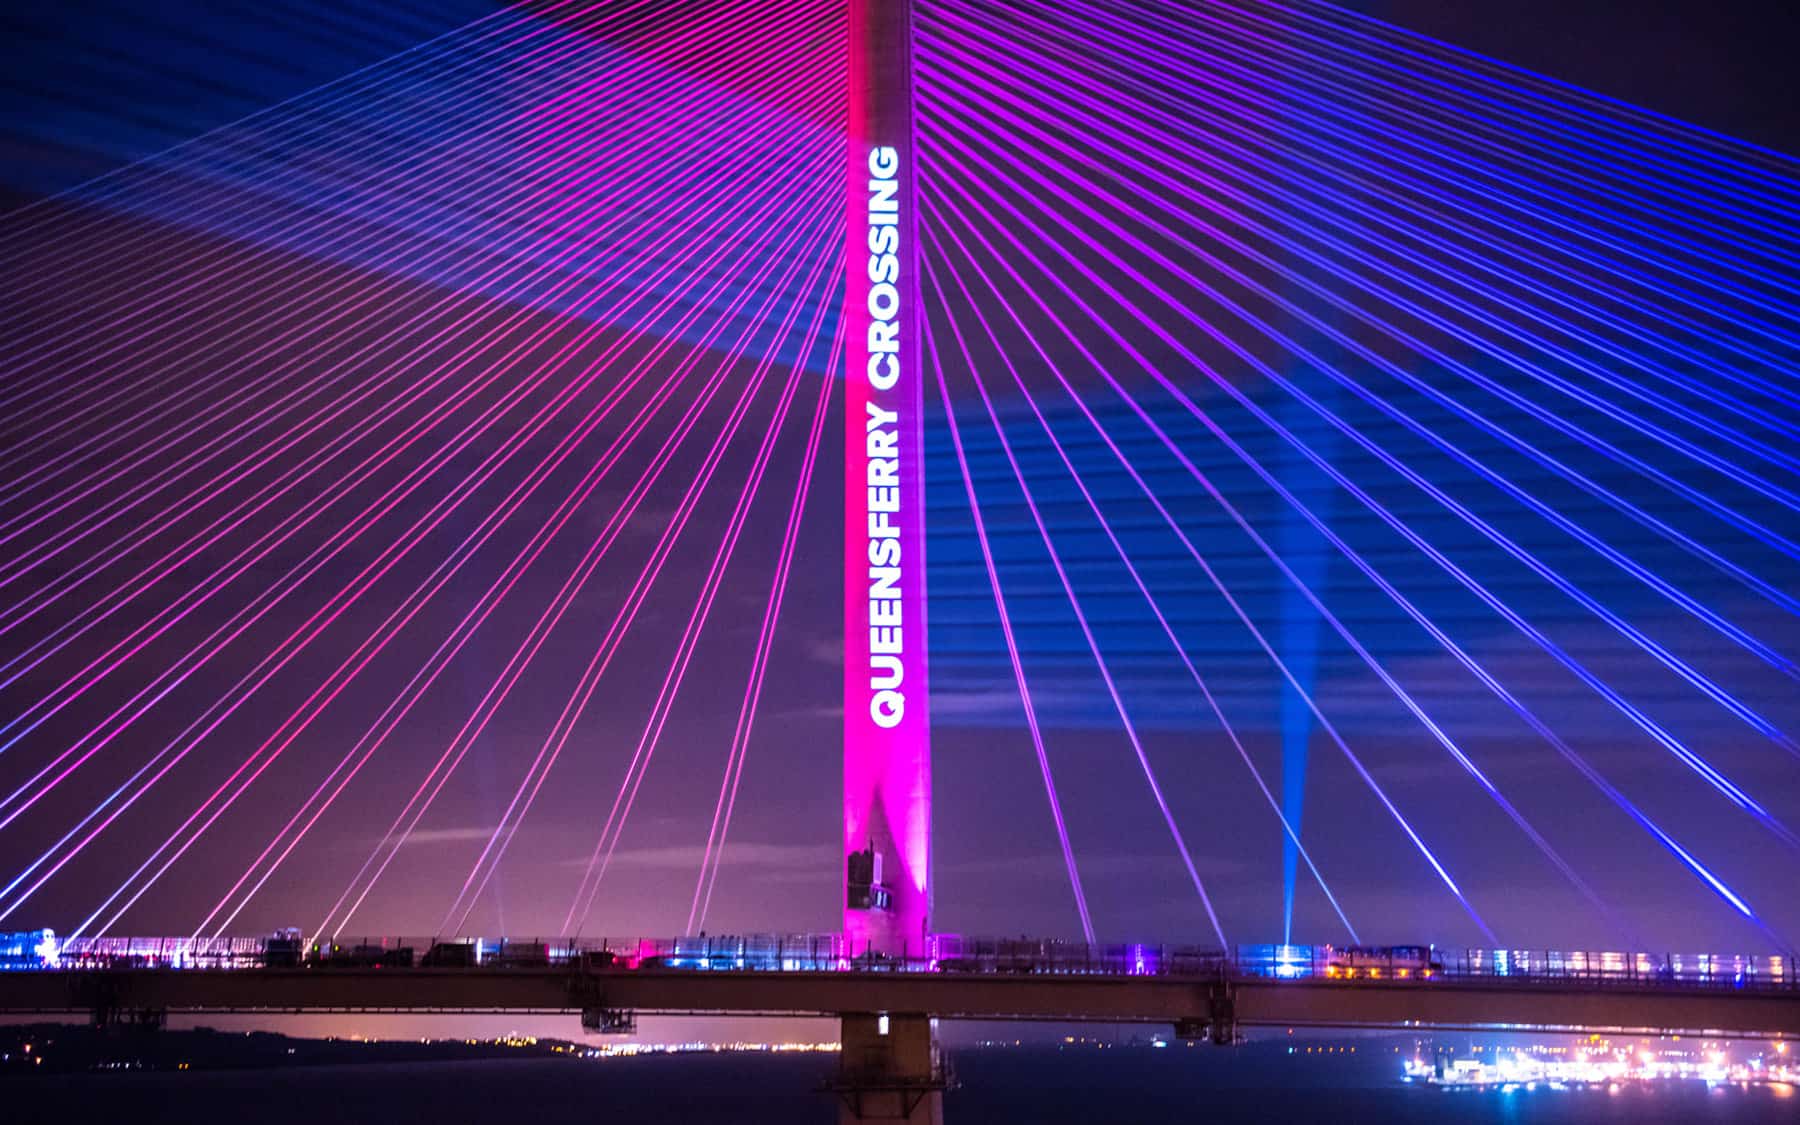 Queensferry crossing projections